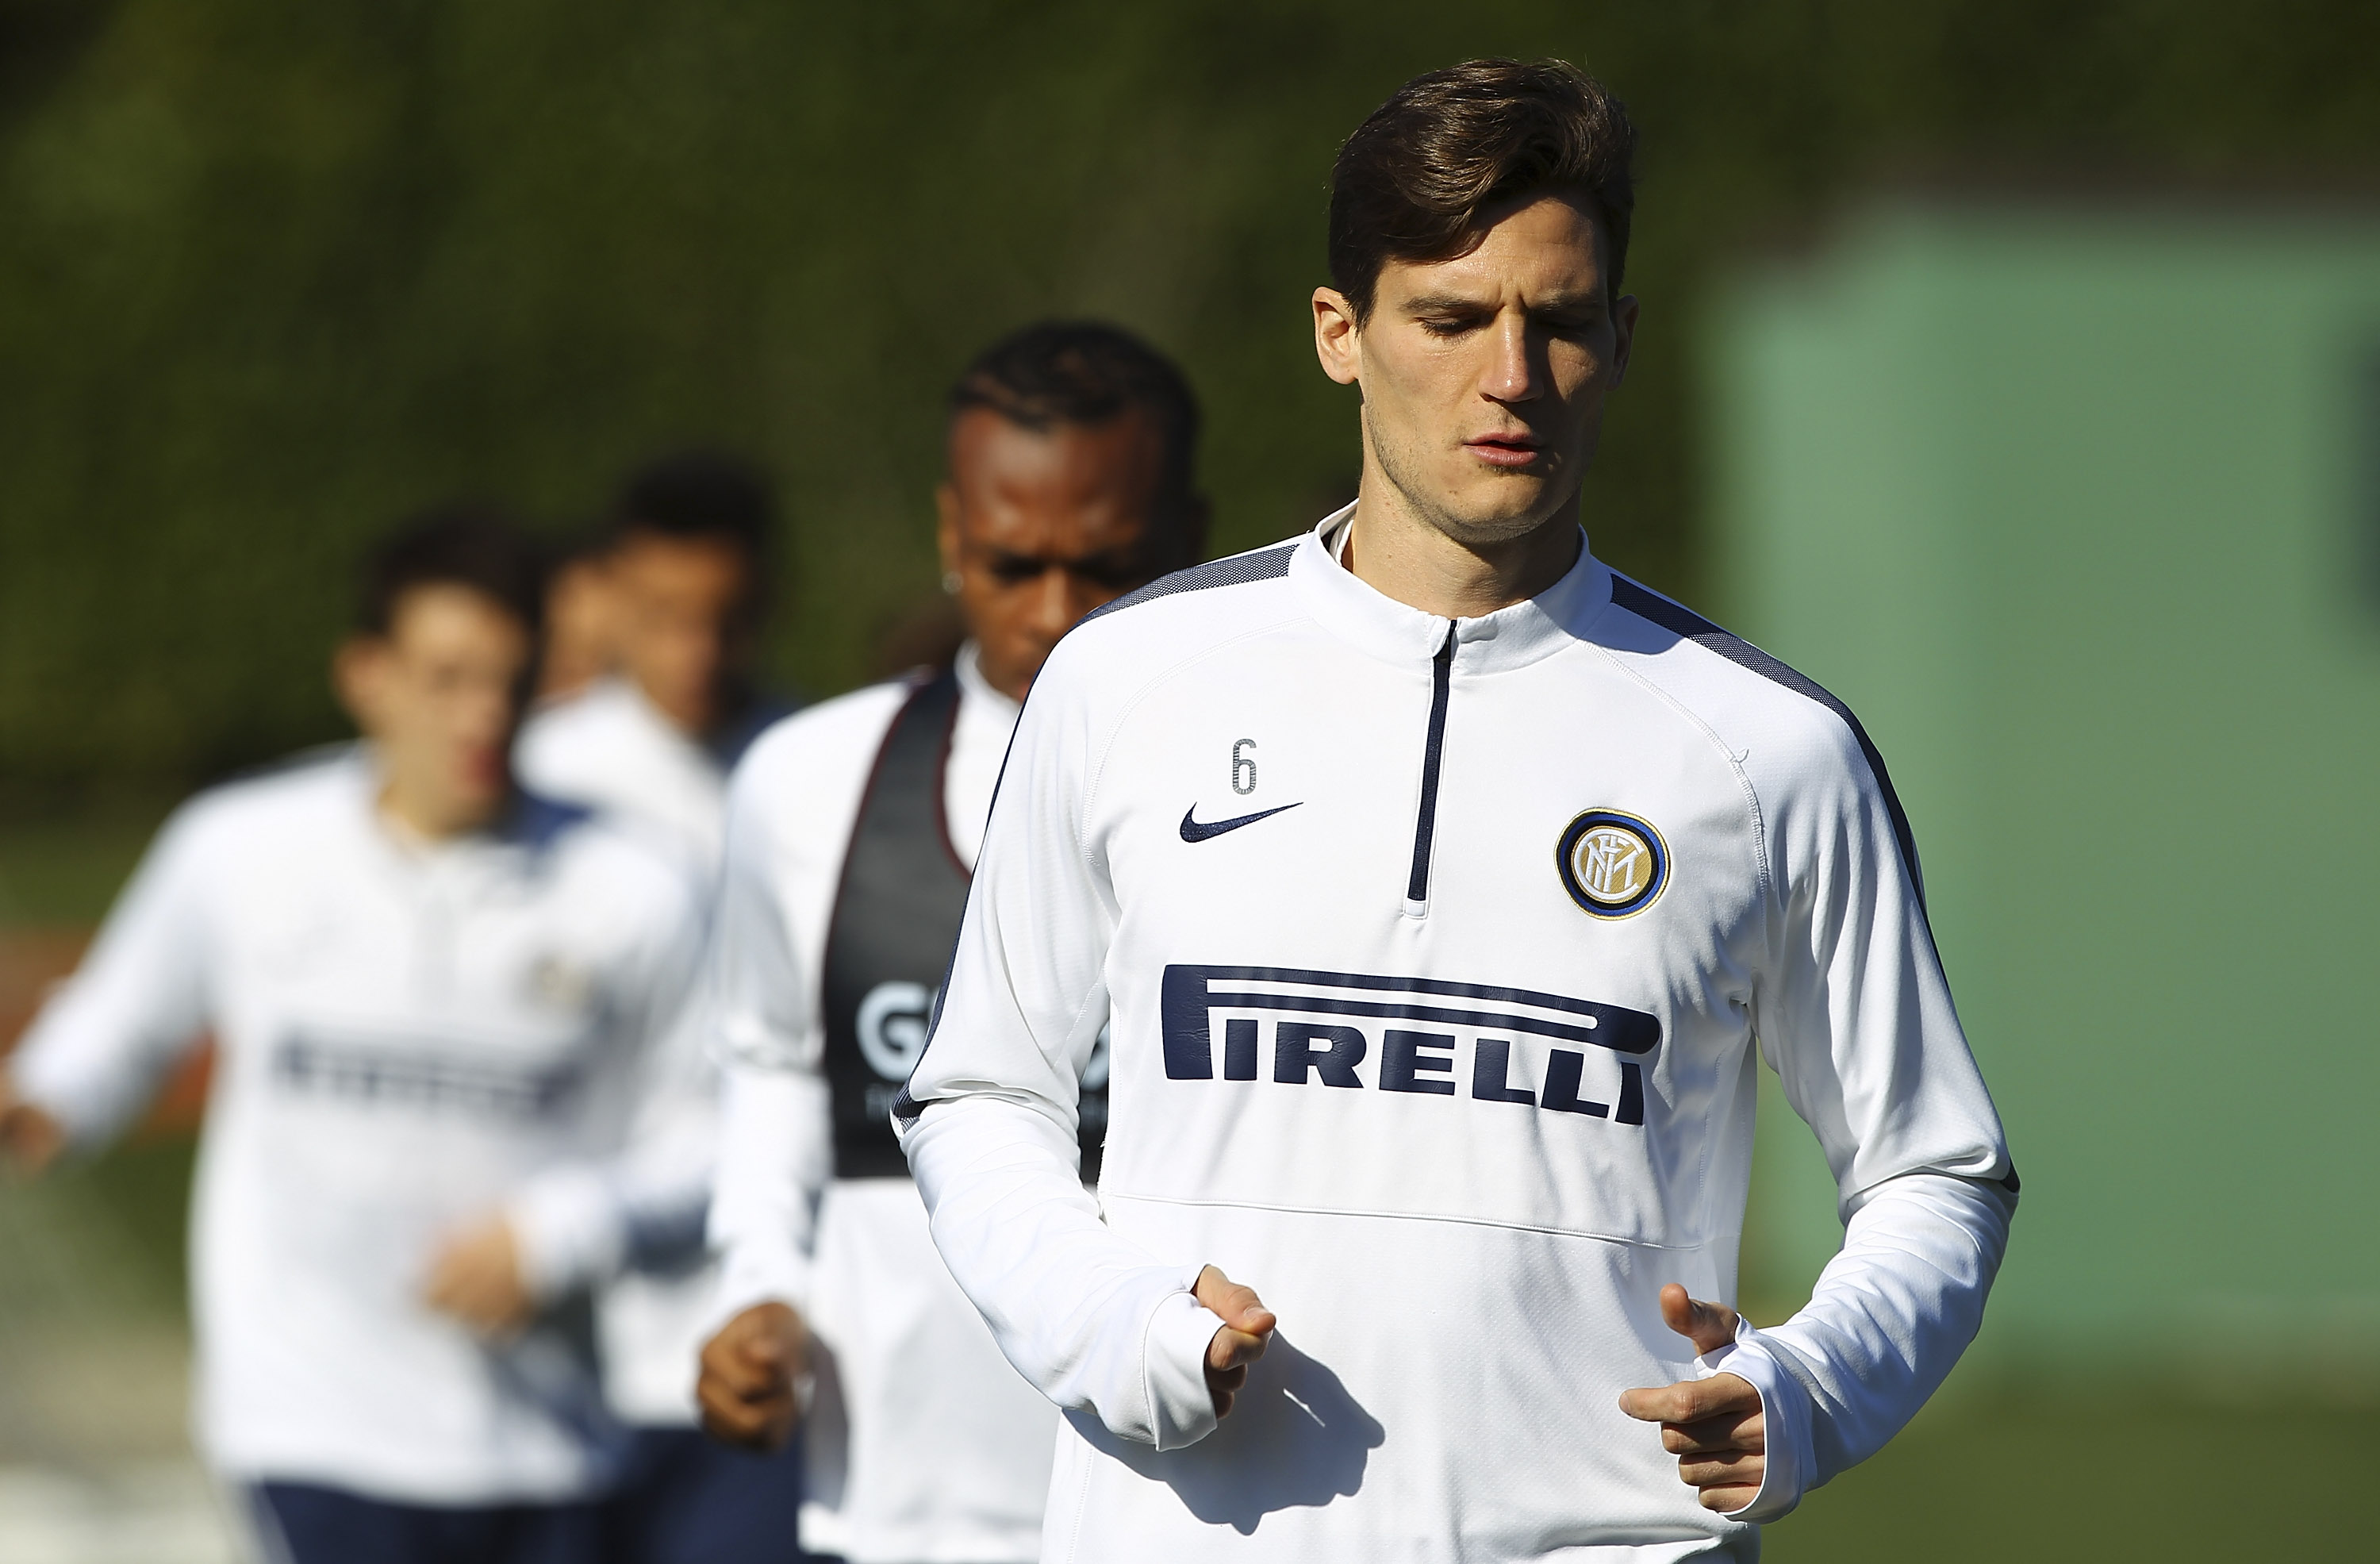 Ex-Inter Defender Marco Andreolli: “Disappointments Like This Part Of The Process Of Growth”